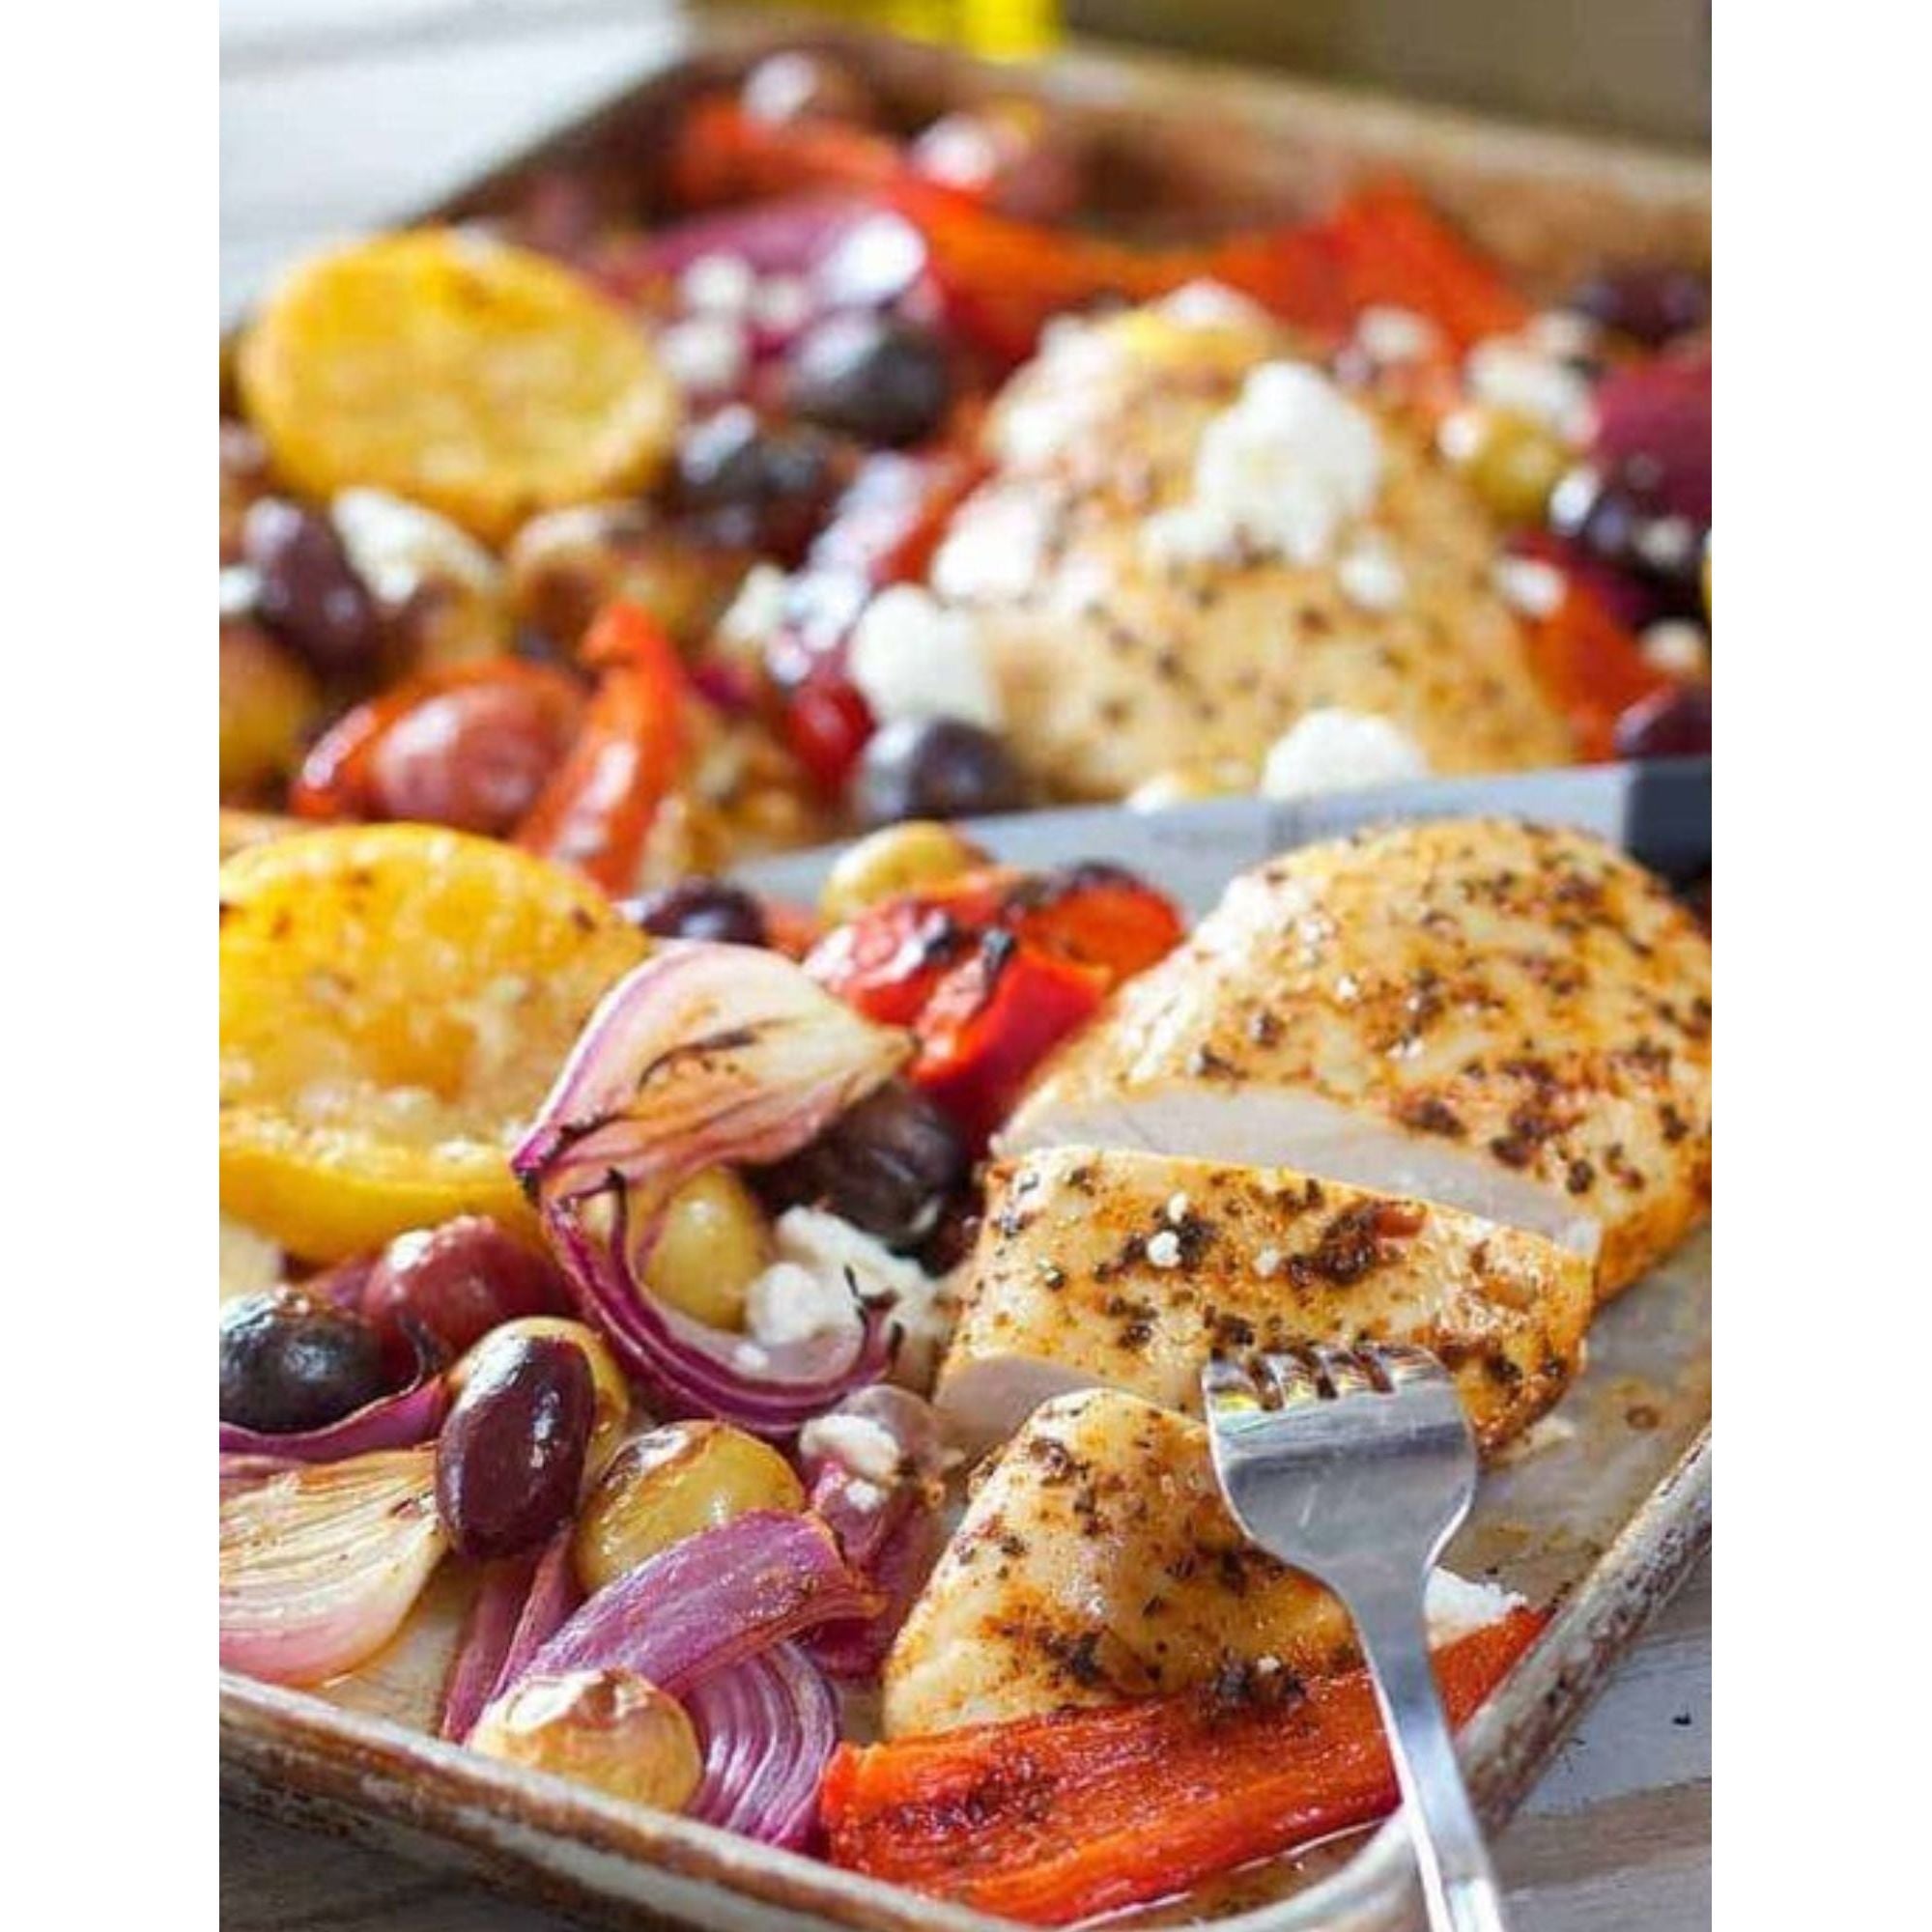 Greek sheet pan meal with chicken, feta cheese, peppers and olives.